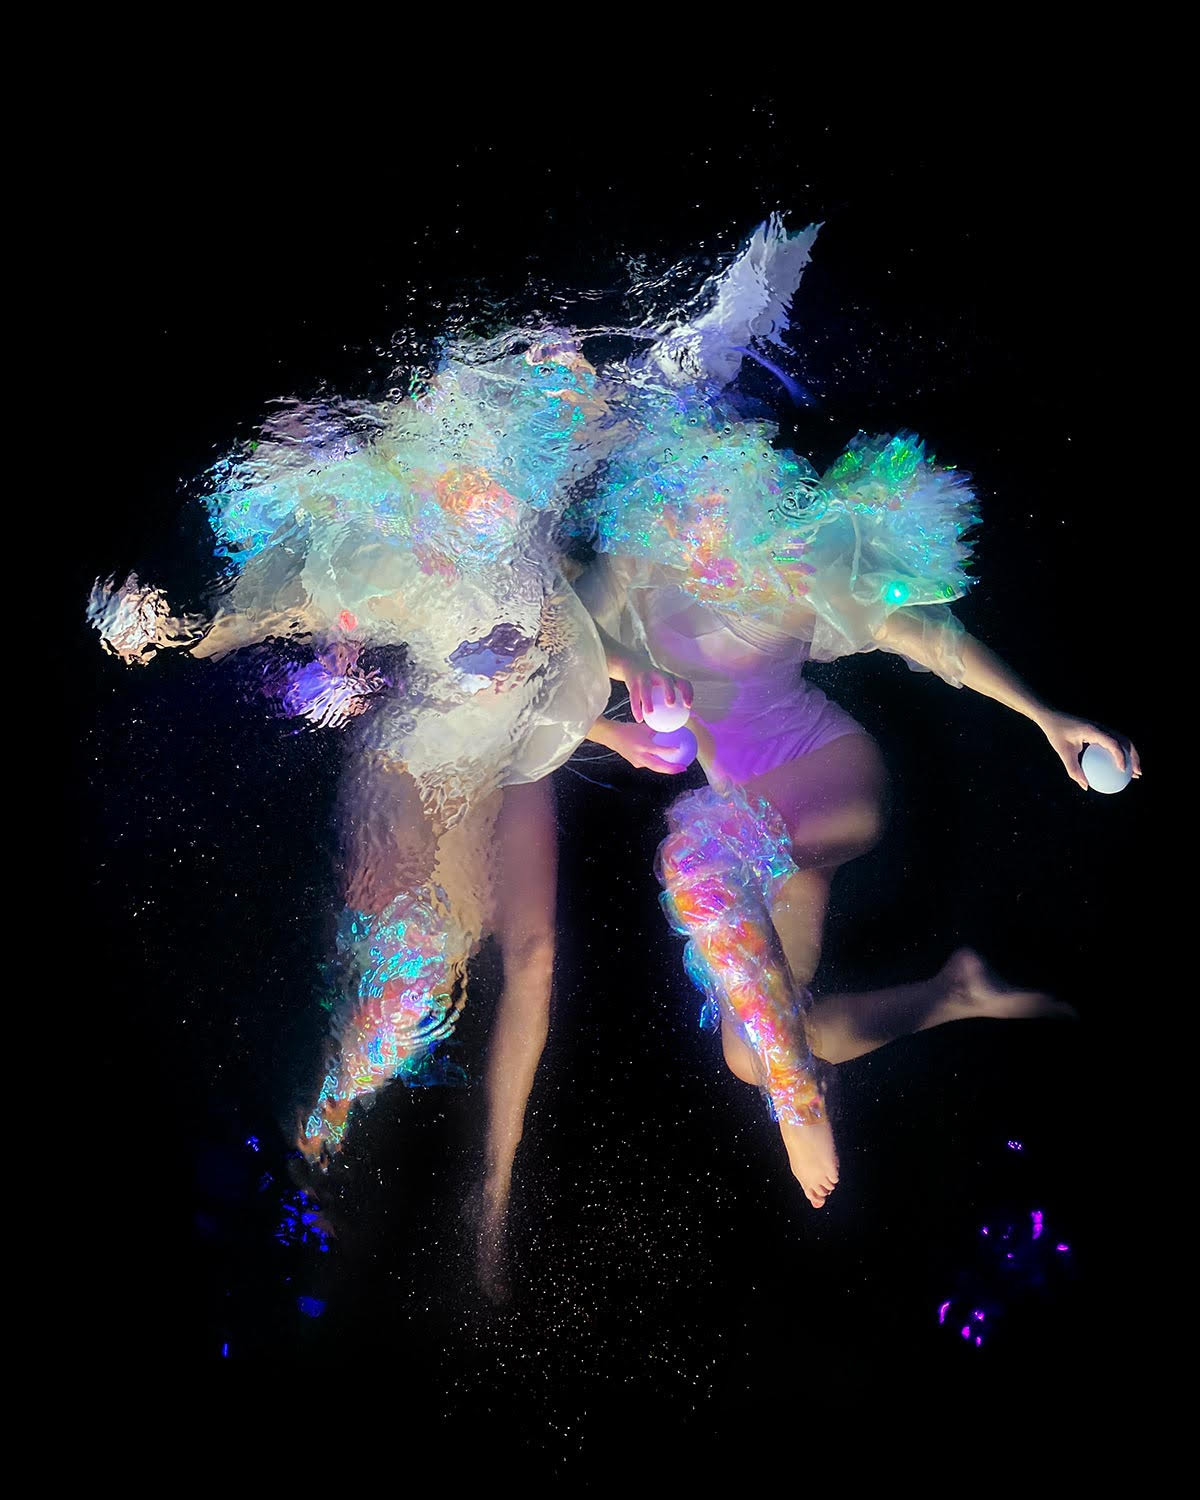 Swirling Fabrics Envelop Floating Subjects in Underwater Photographs by Christy Lee Rogers